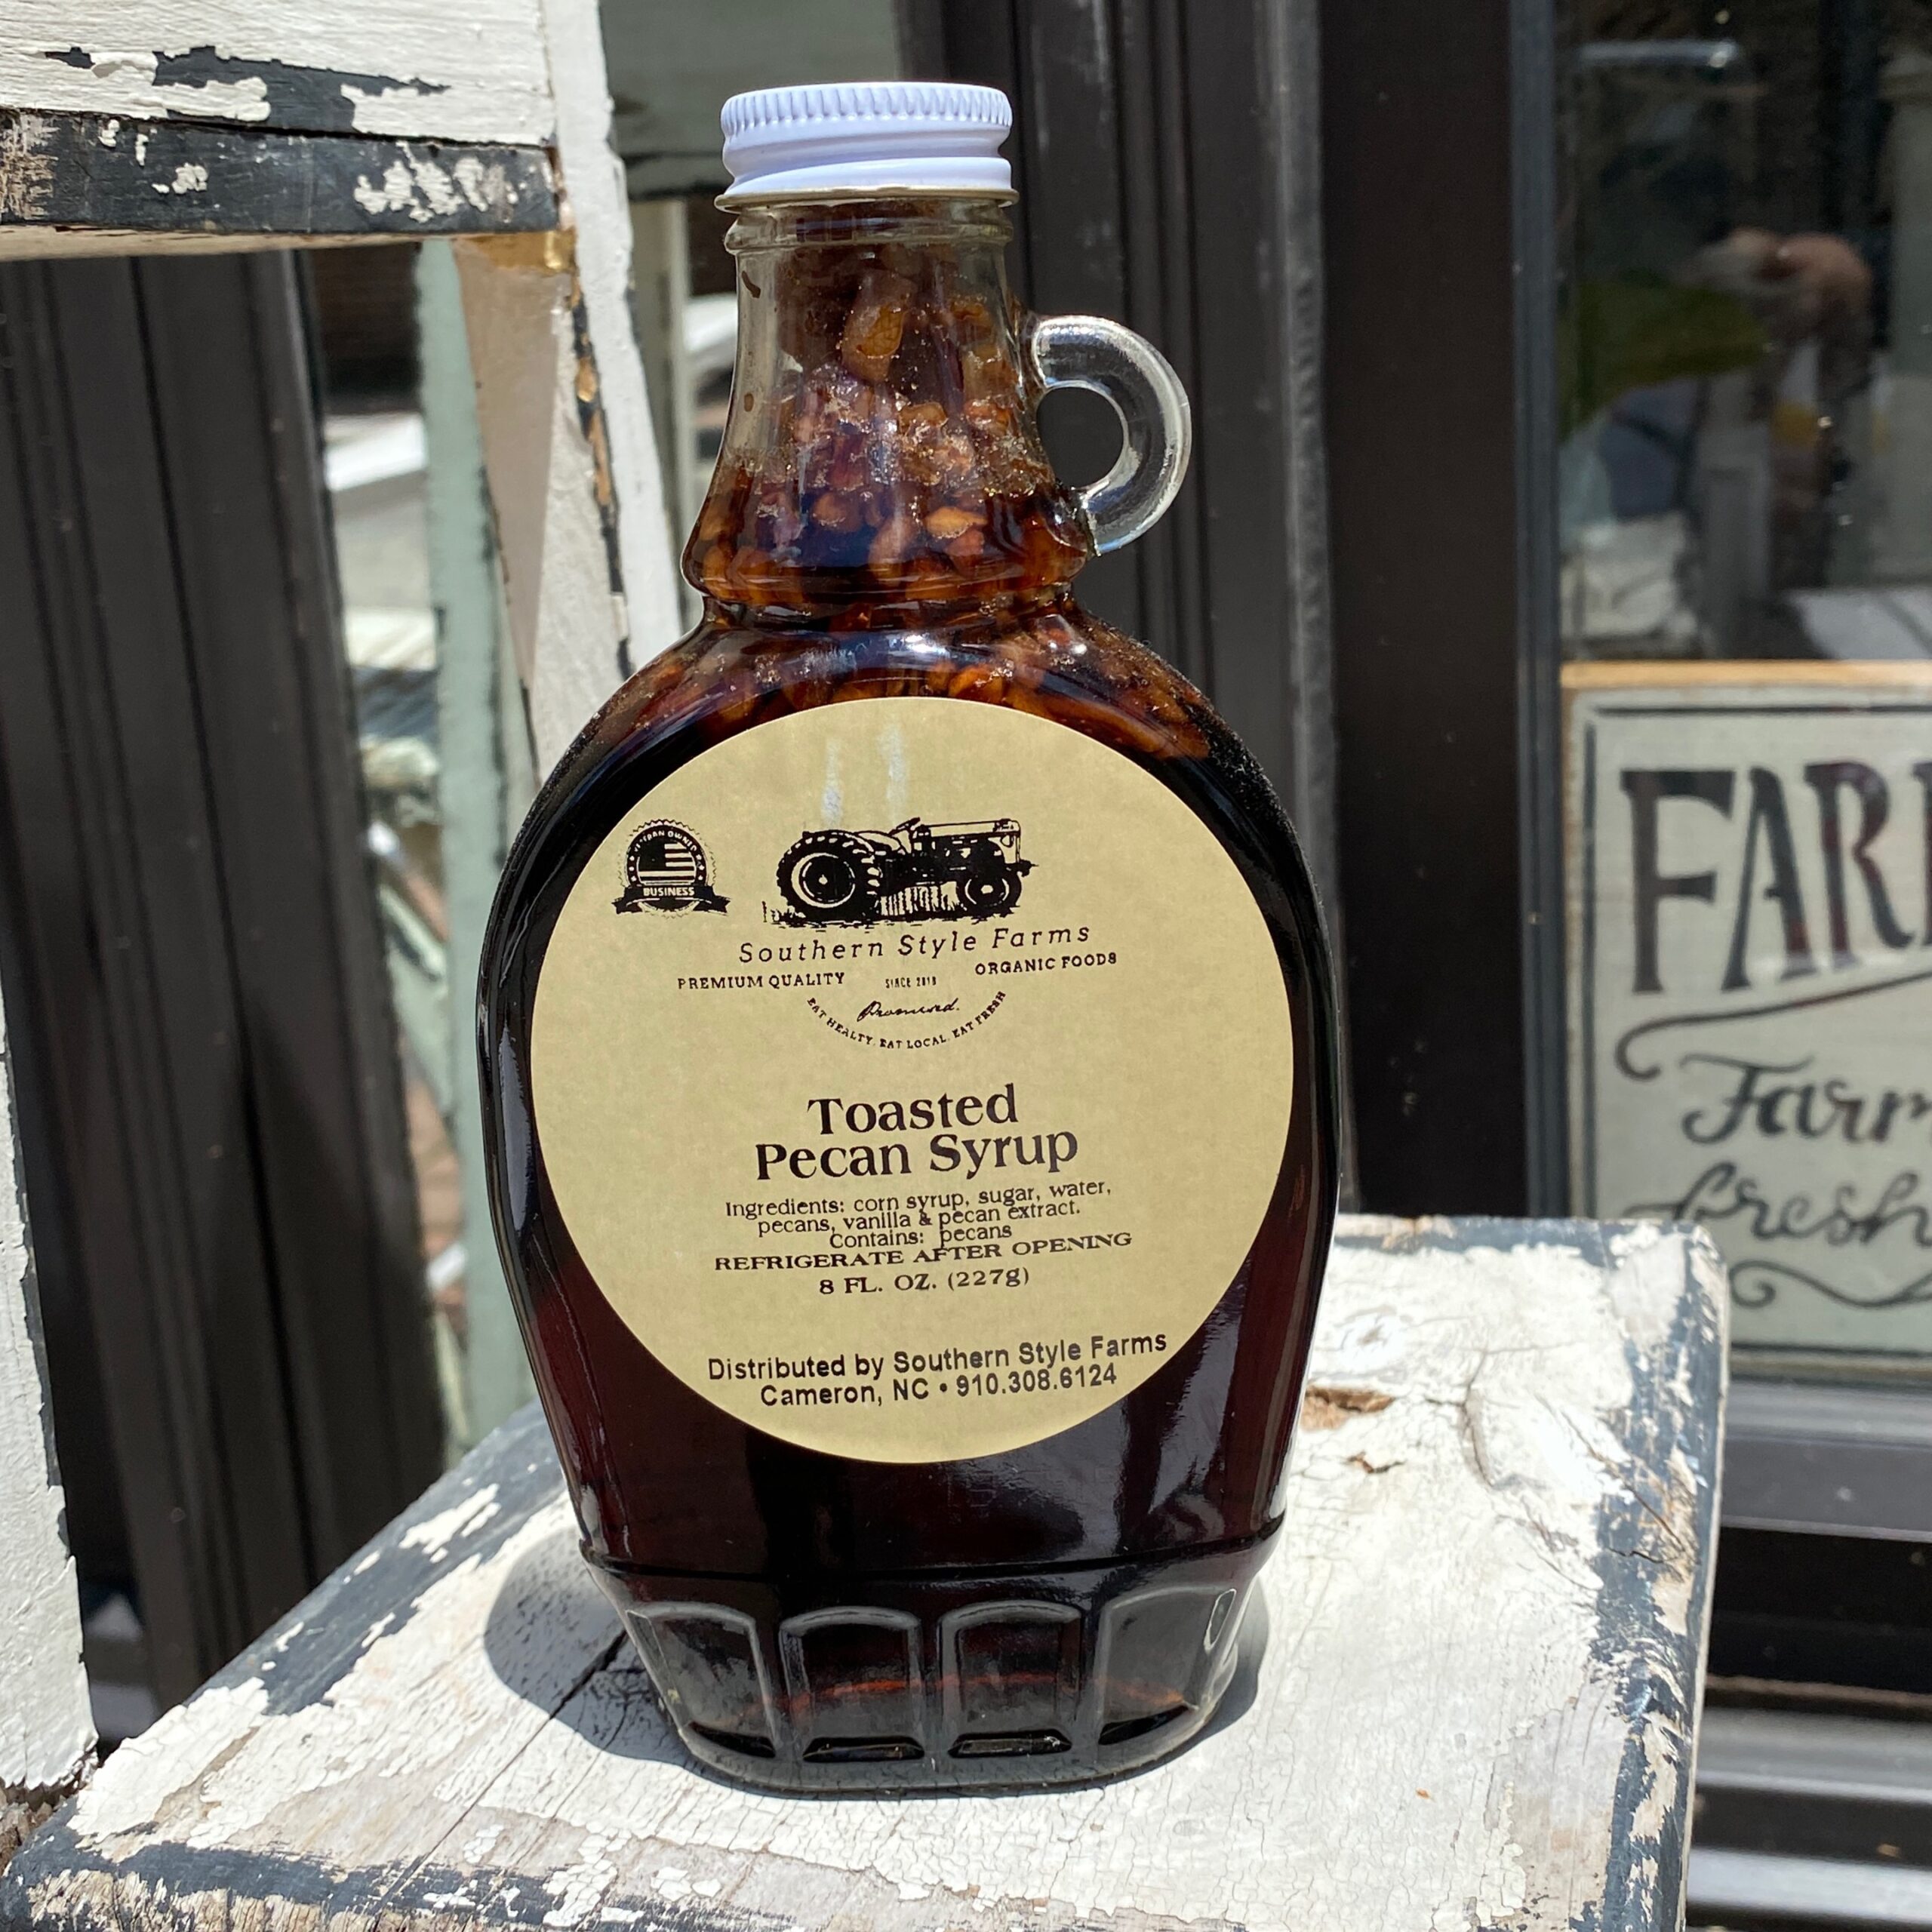 Southern Style Farms Toasted Pecan Syrup